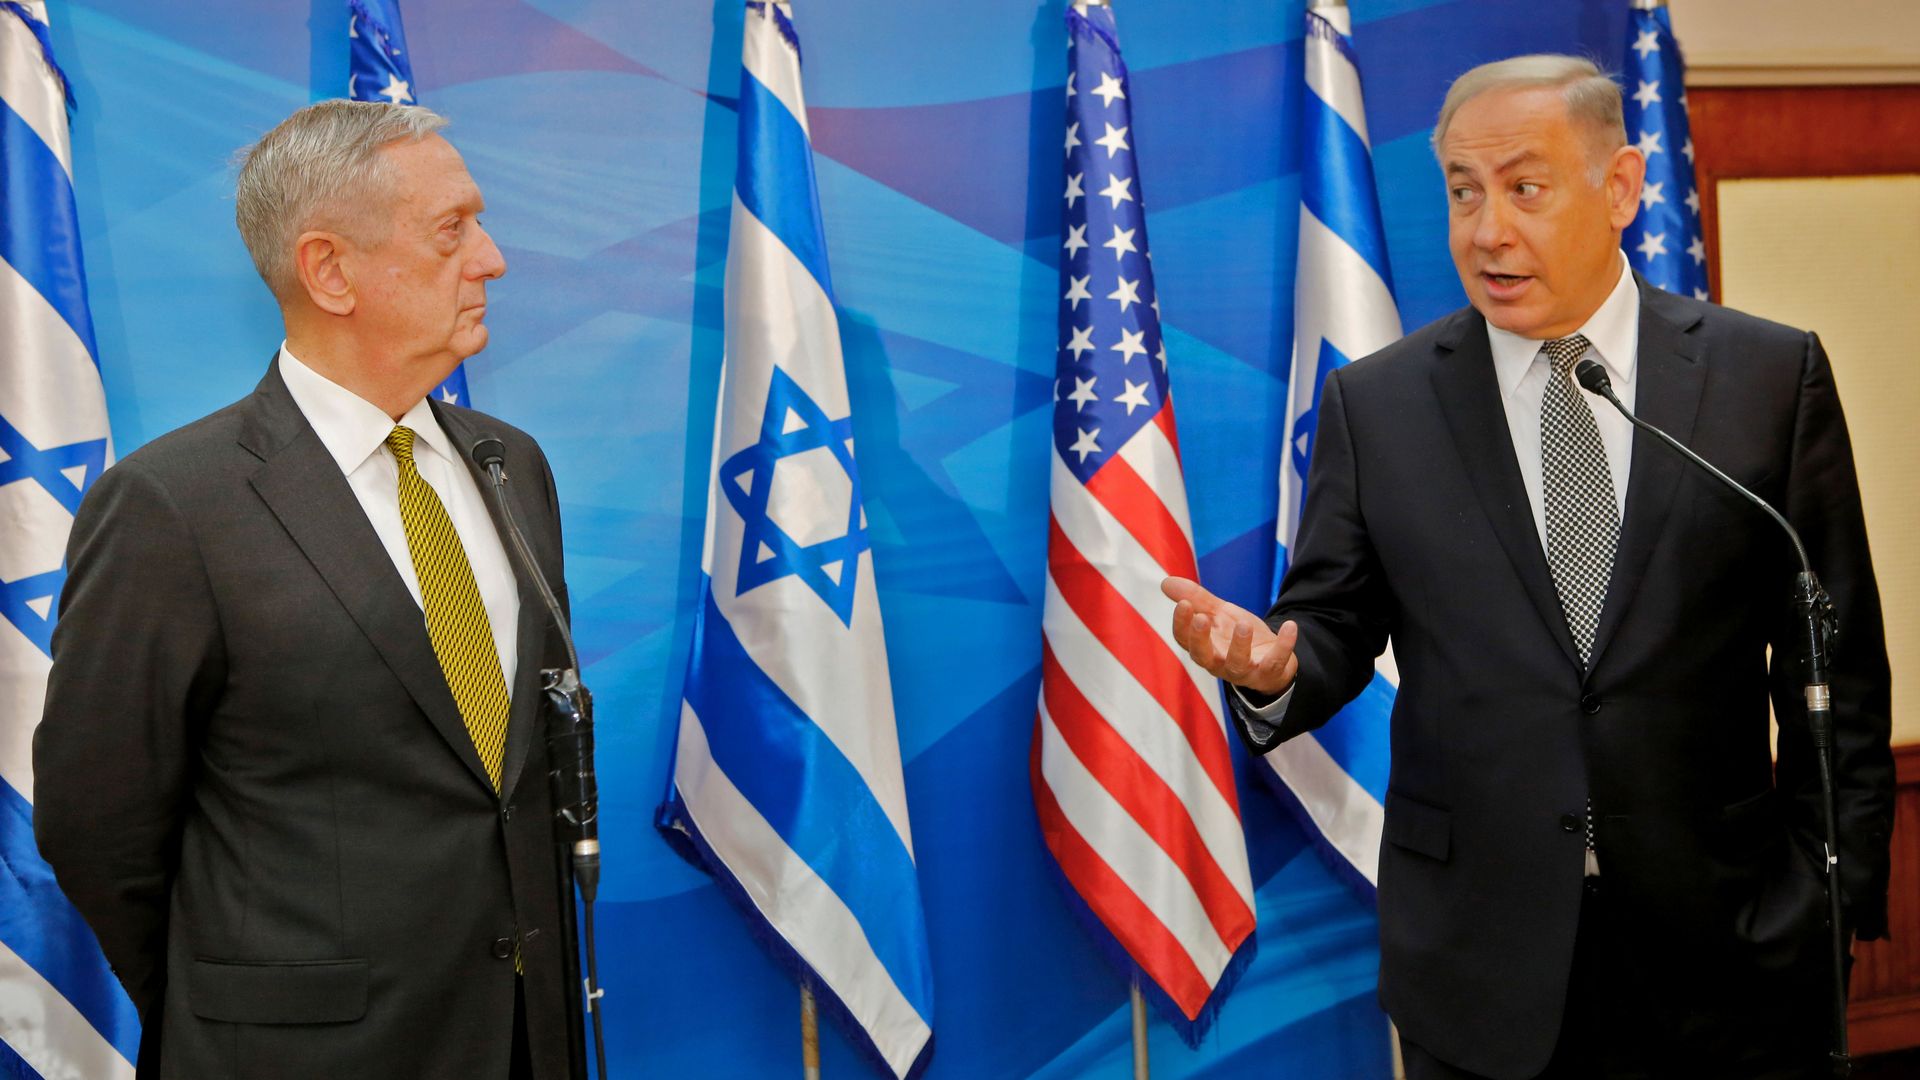 Scoop: Mattis rejected Netanyahu’s request on arms deal with Croatia